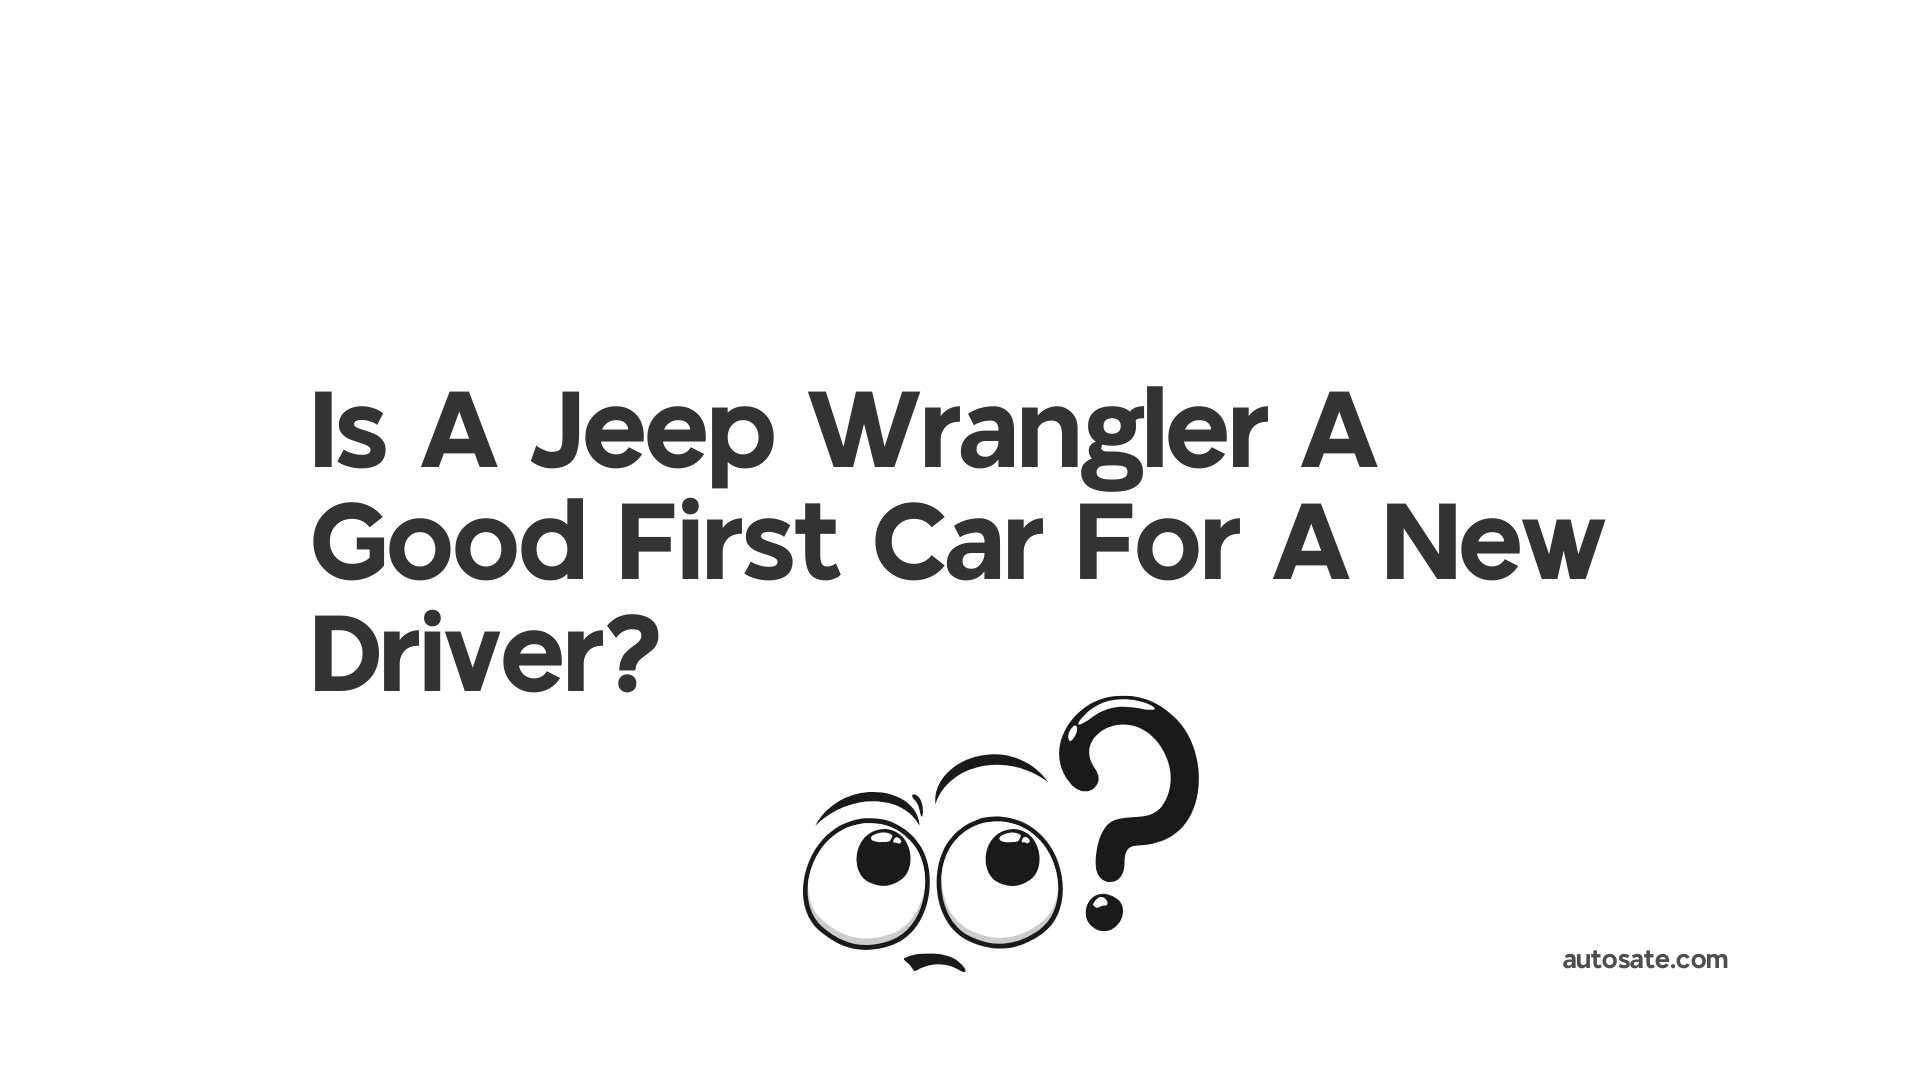 Is A Jeep Wrangler A Good First Car For A New Driver?